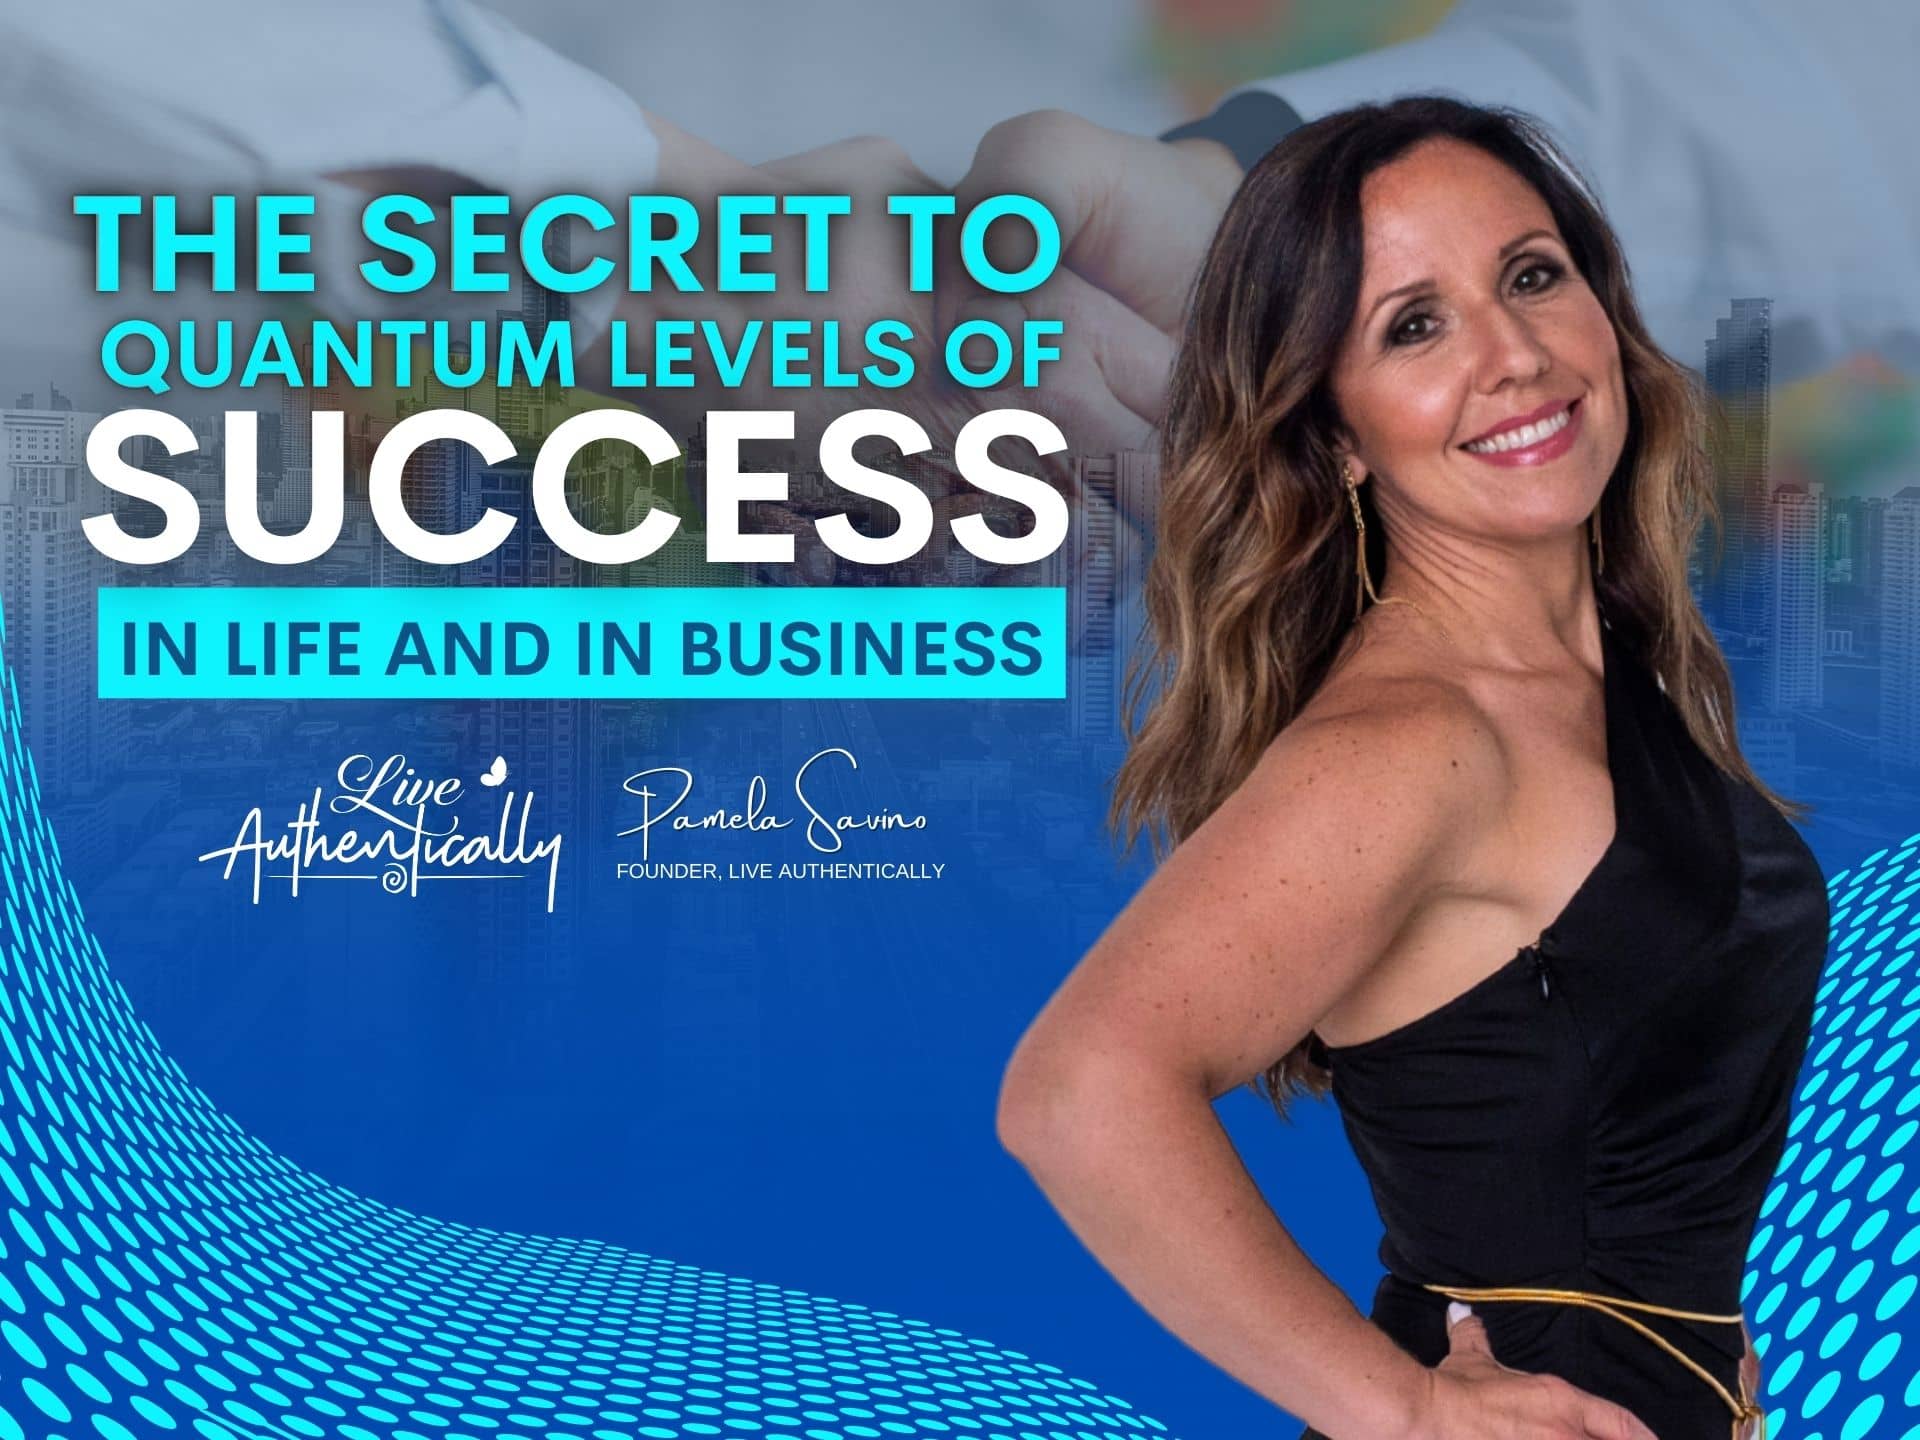 The Secret to Quantum Levels of Success, in Life and in Business